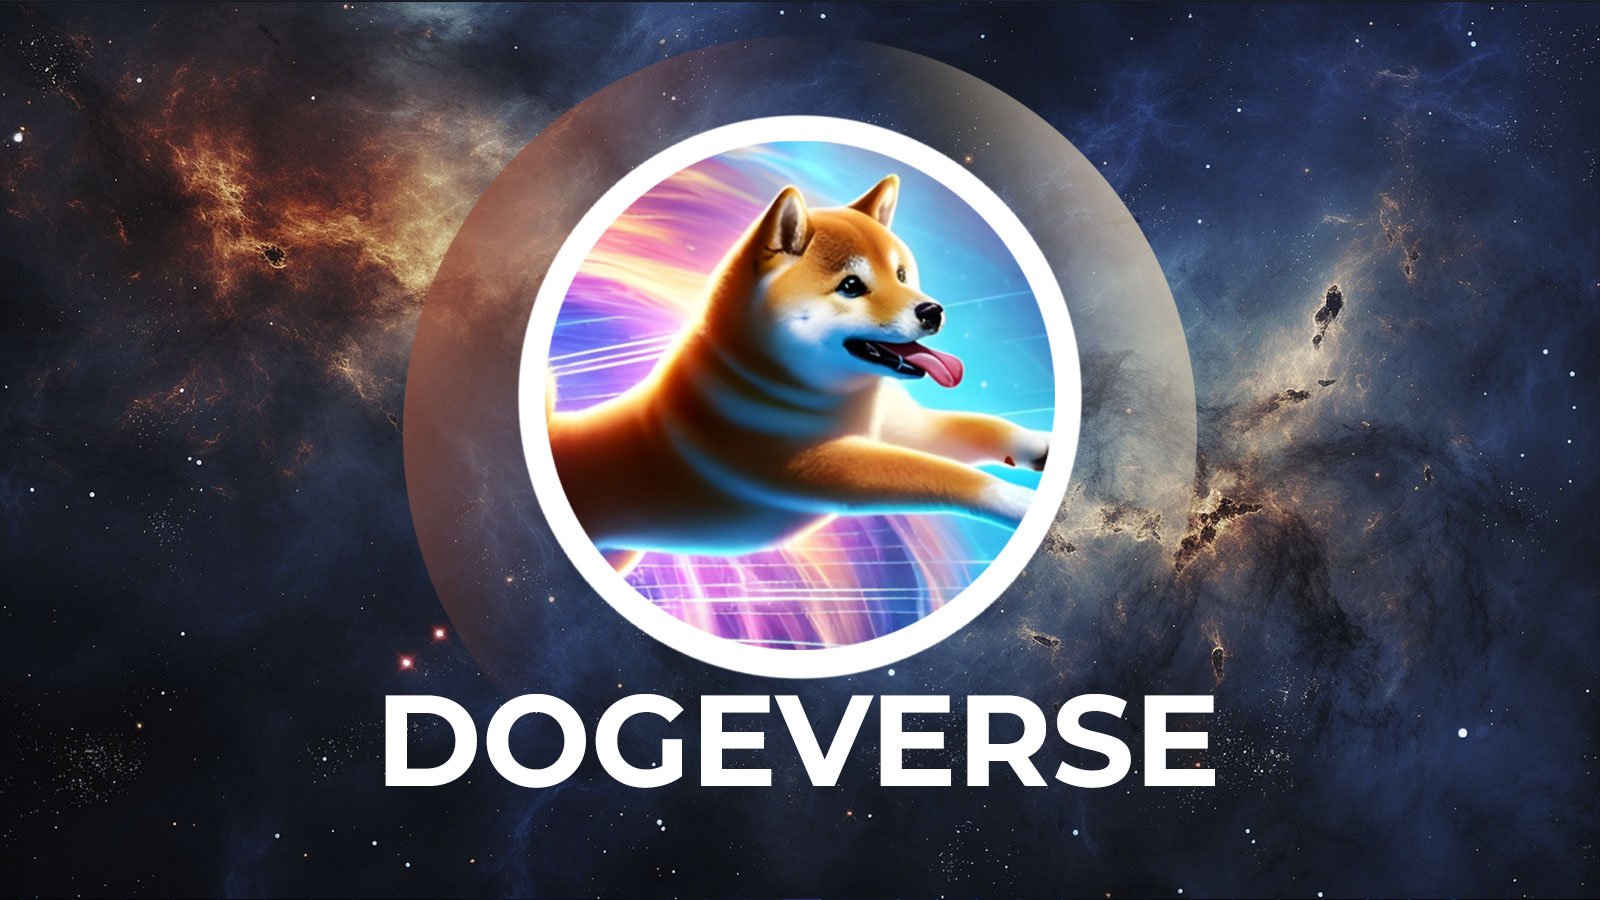 Multichain Meme Coin Dogeverse Hits $10M in Presale – Is it Too Late to Buy?